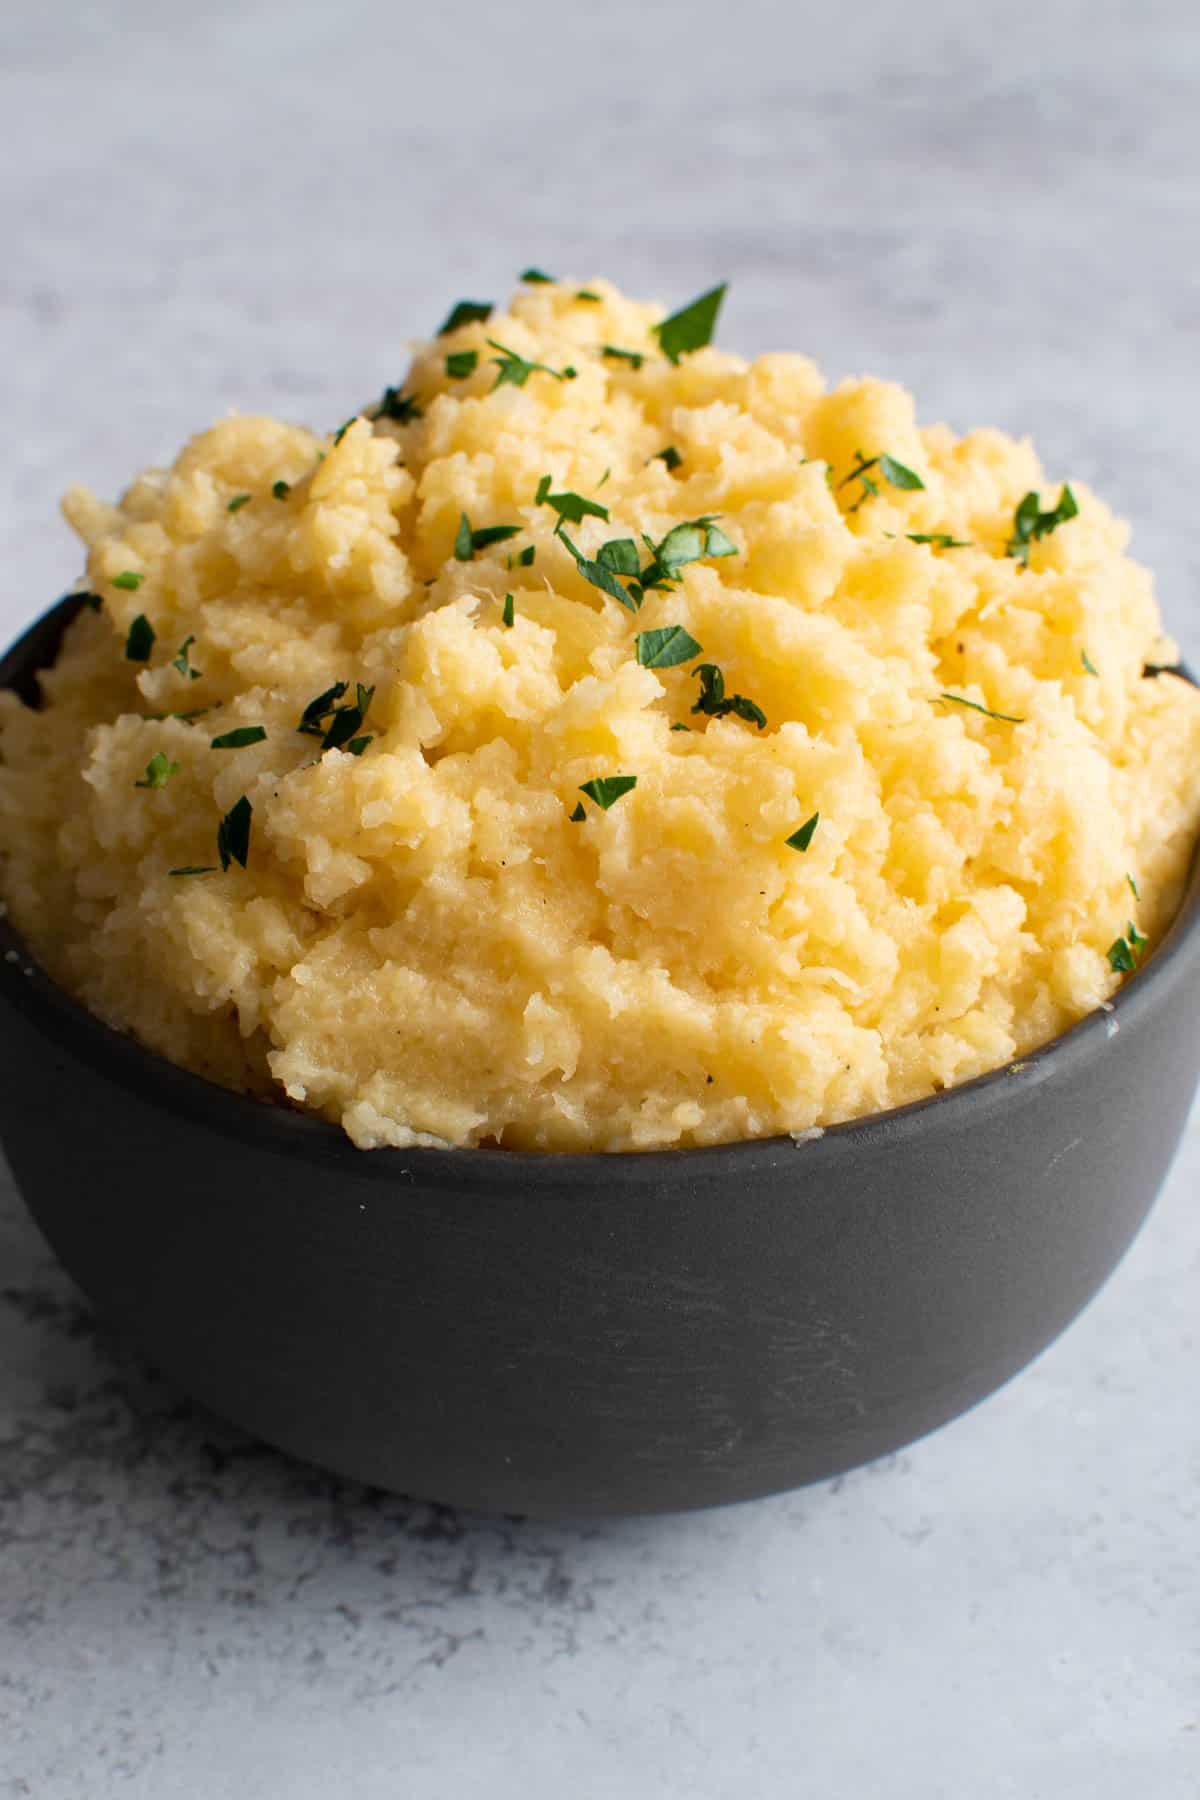 A bowl of creamy mashed swede.